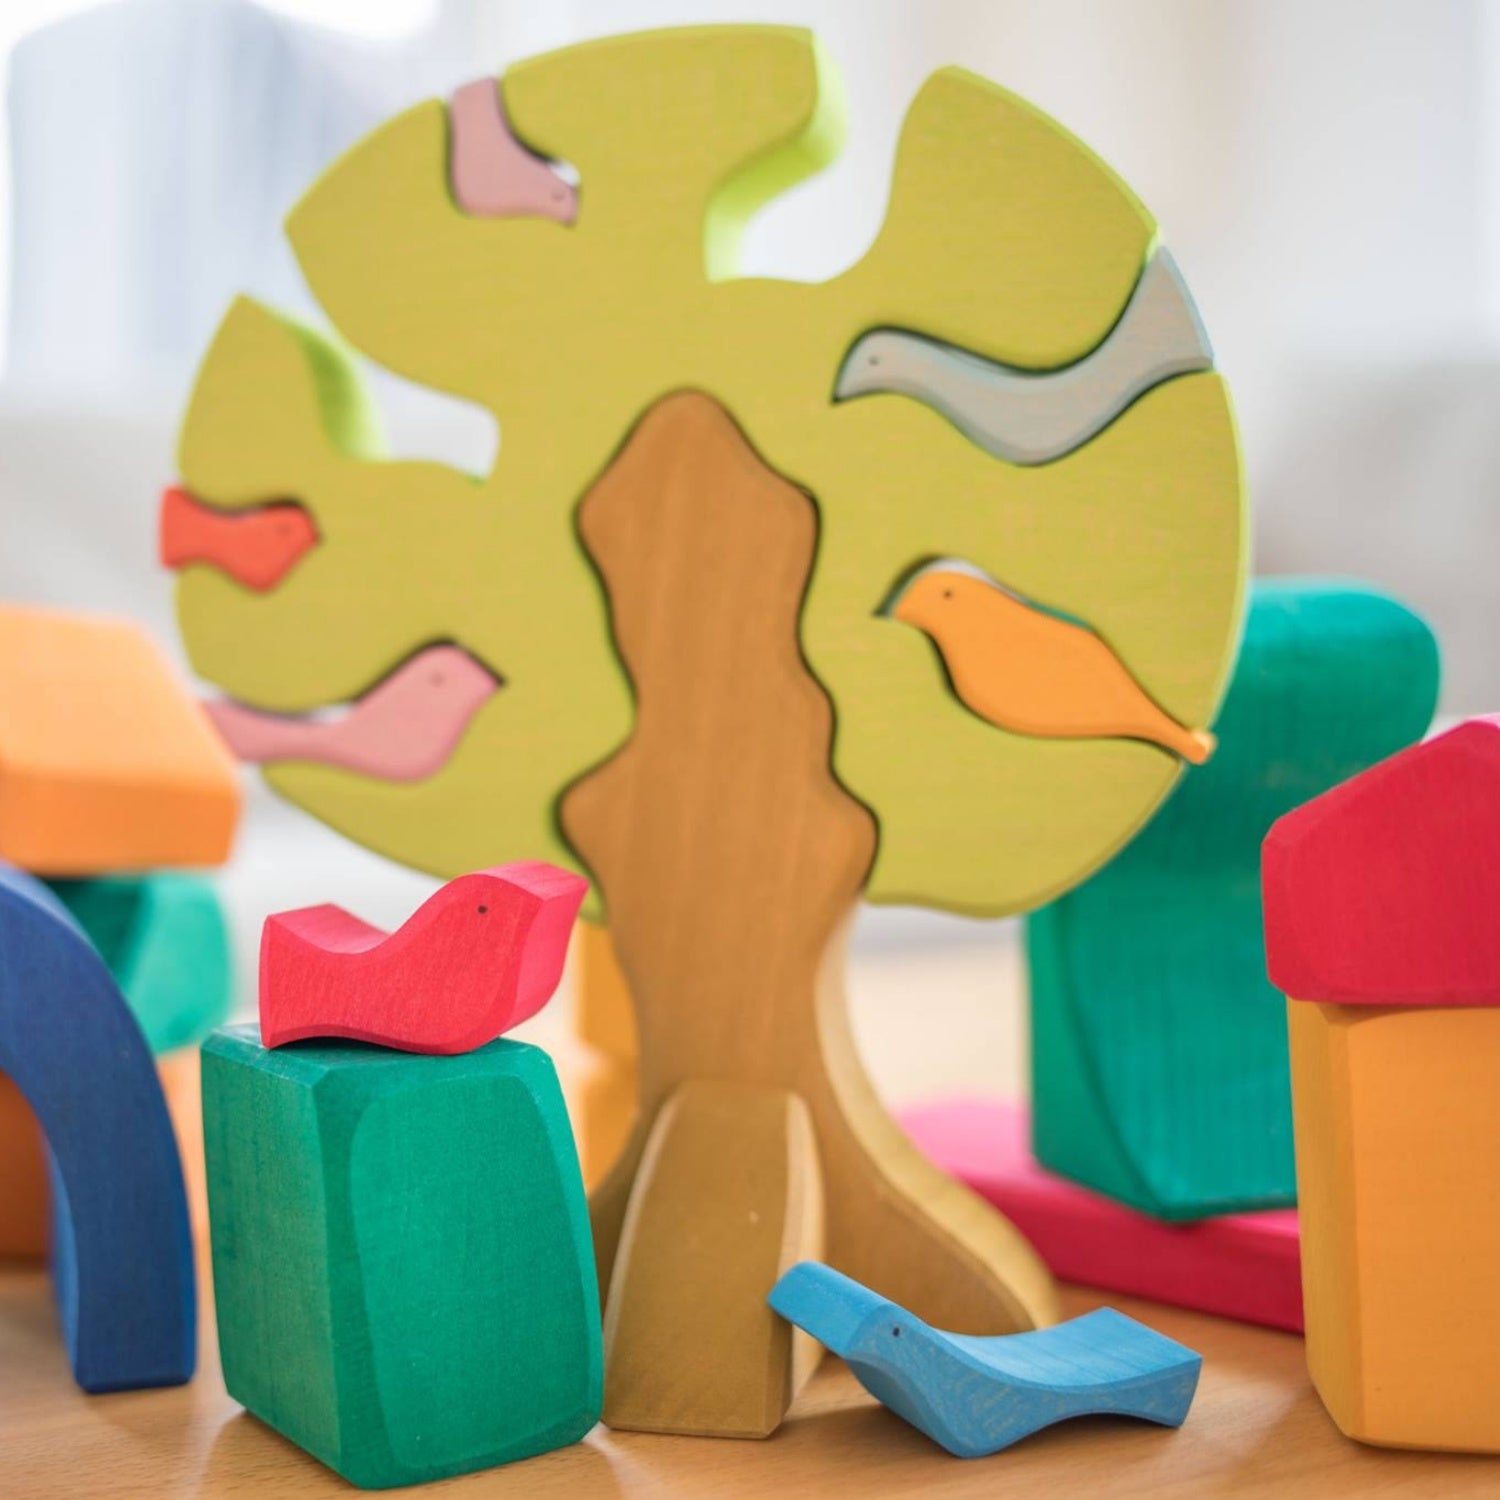 Gluckskafer Wooden Bird Tree Puzzle & Stacker | Imaginative Play Wooden Toys | Waldorf Education and Montessori Education | Lifestyle – Bird Tree in Small World Pay Scene | BeoVERDE.ie